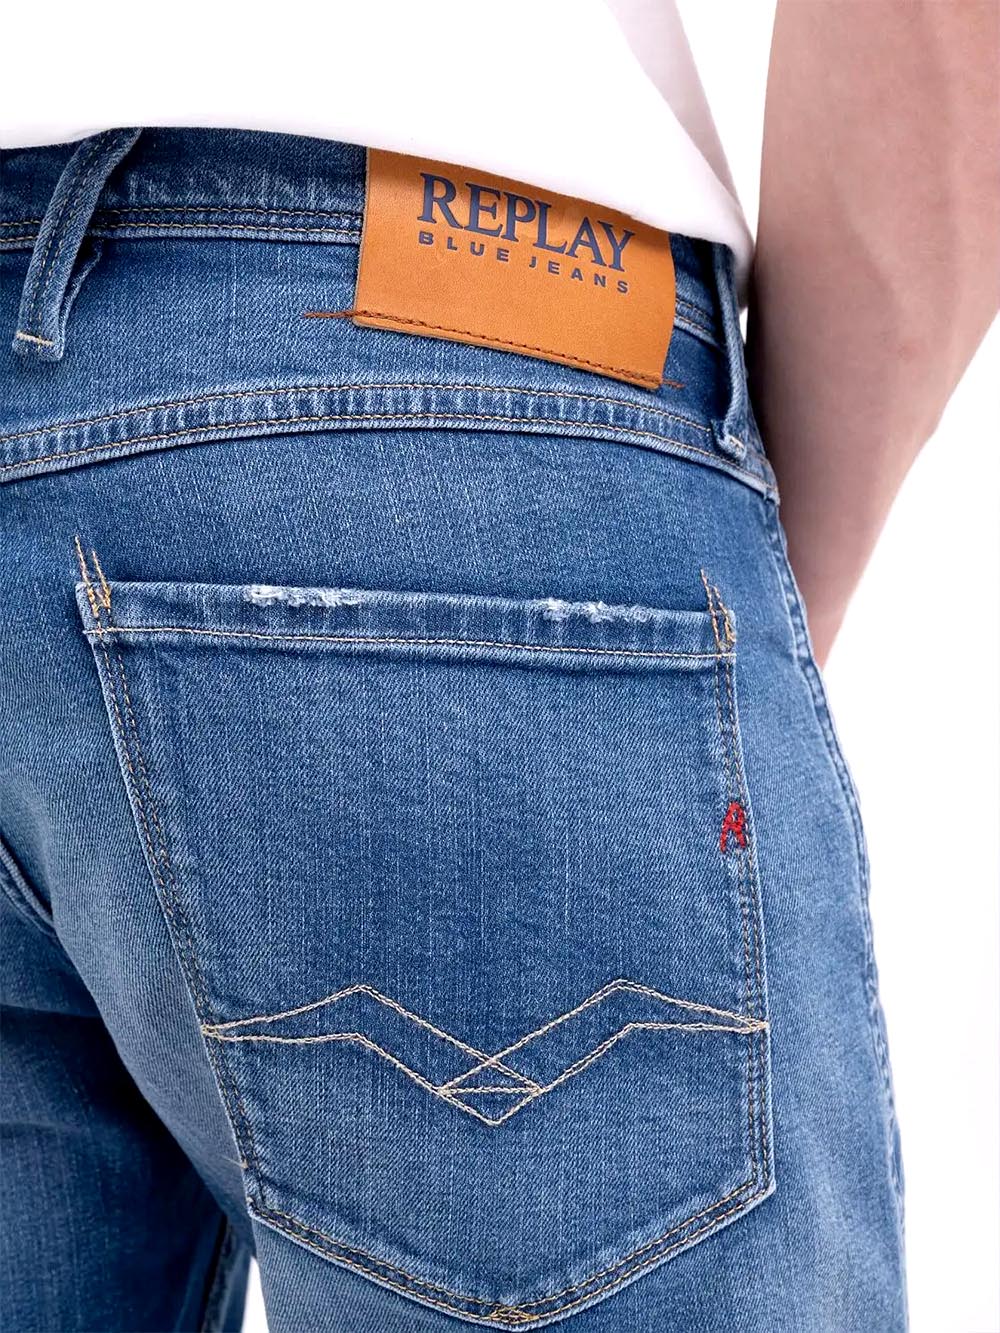 Replay Jeans Uomo M914y .000.573 600 Scuro